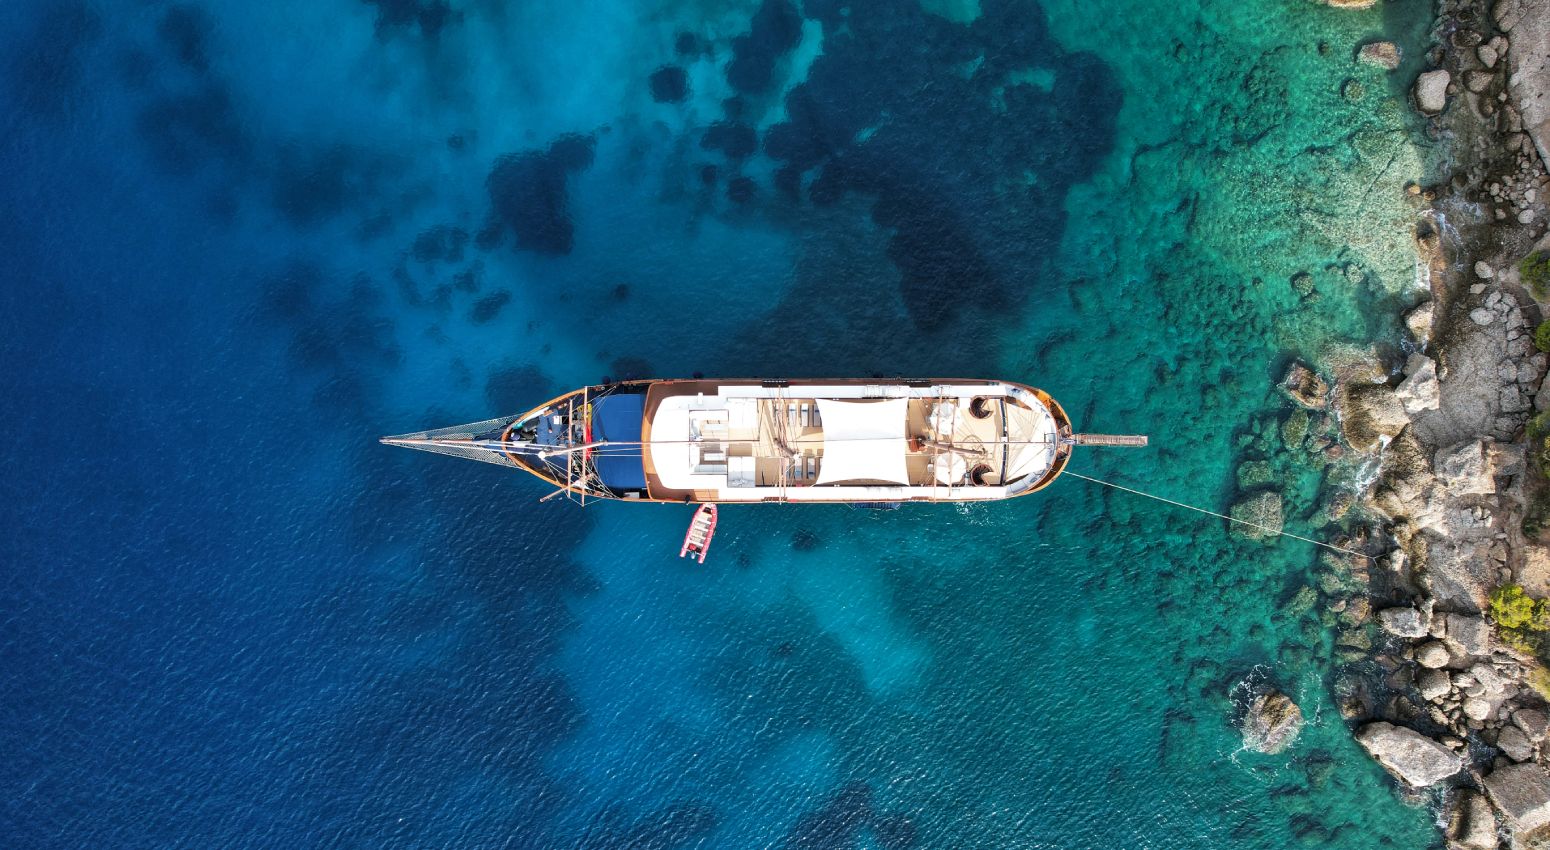 Aerial view of a small cruise ship in the ocean